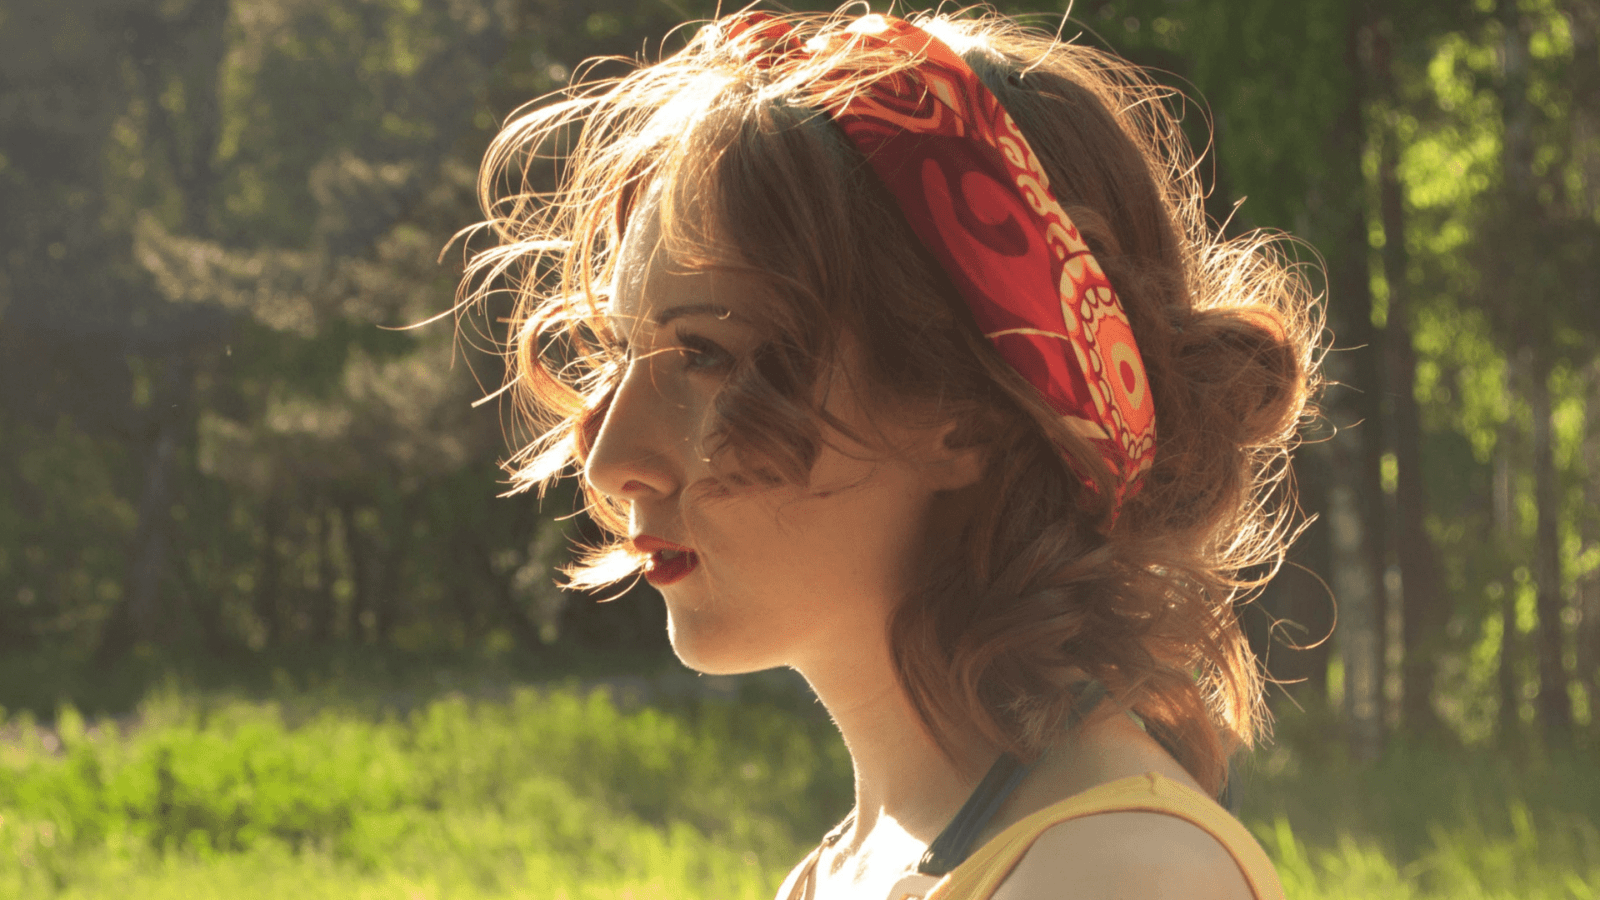 Our Favorite Hair Bandanas to Rock with Red Hair